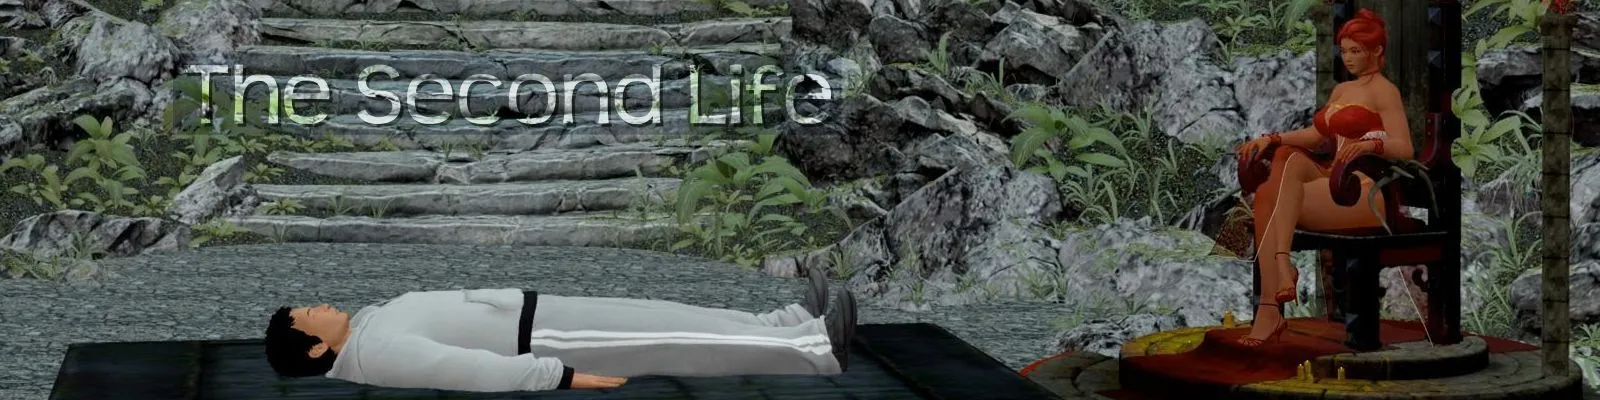 The Second Life main image